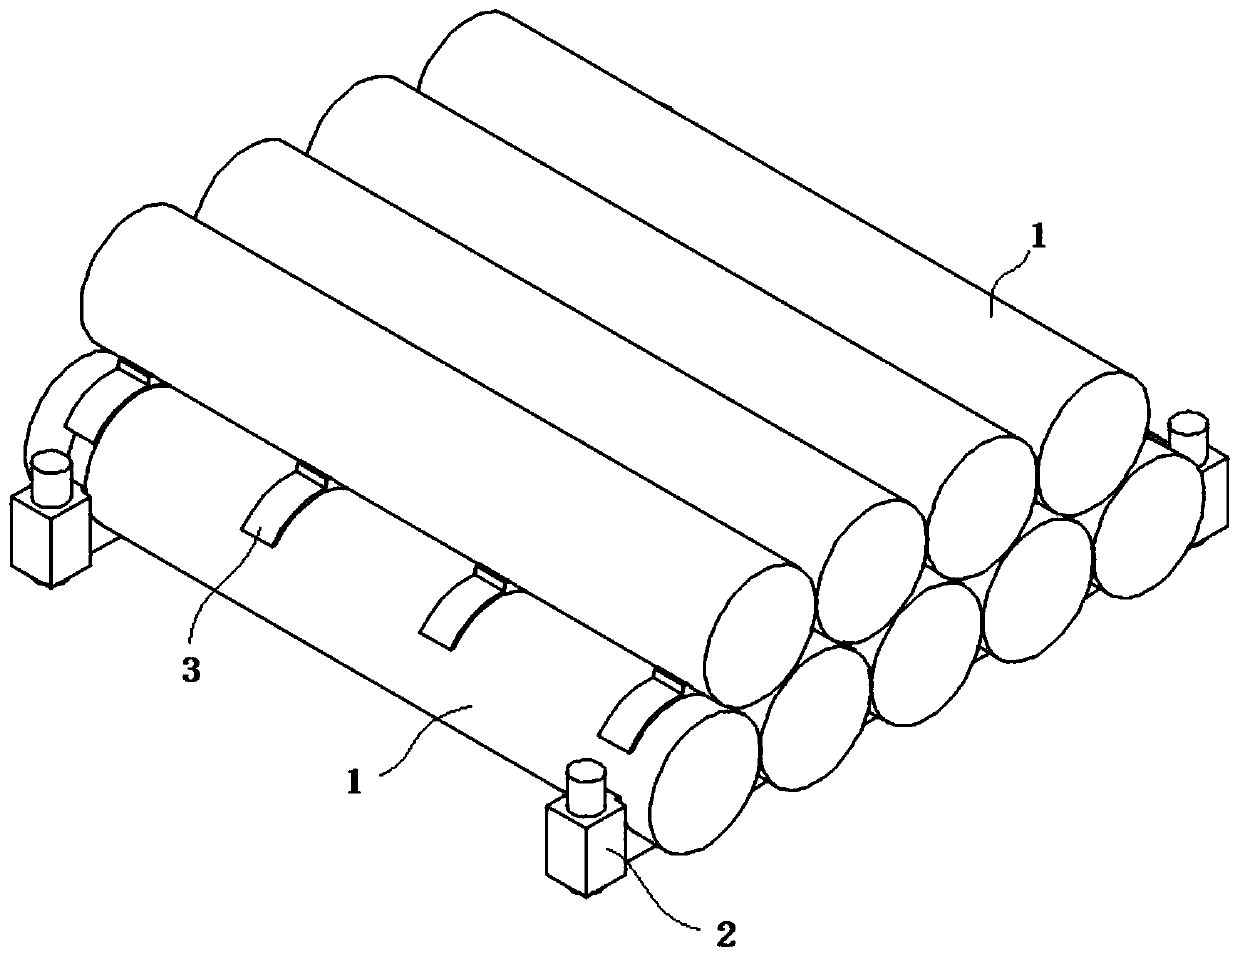 Building pipe stacking device